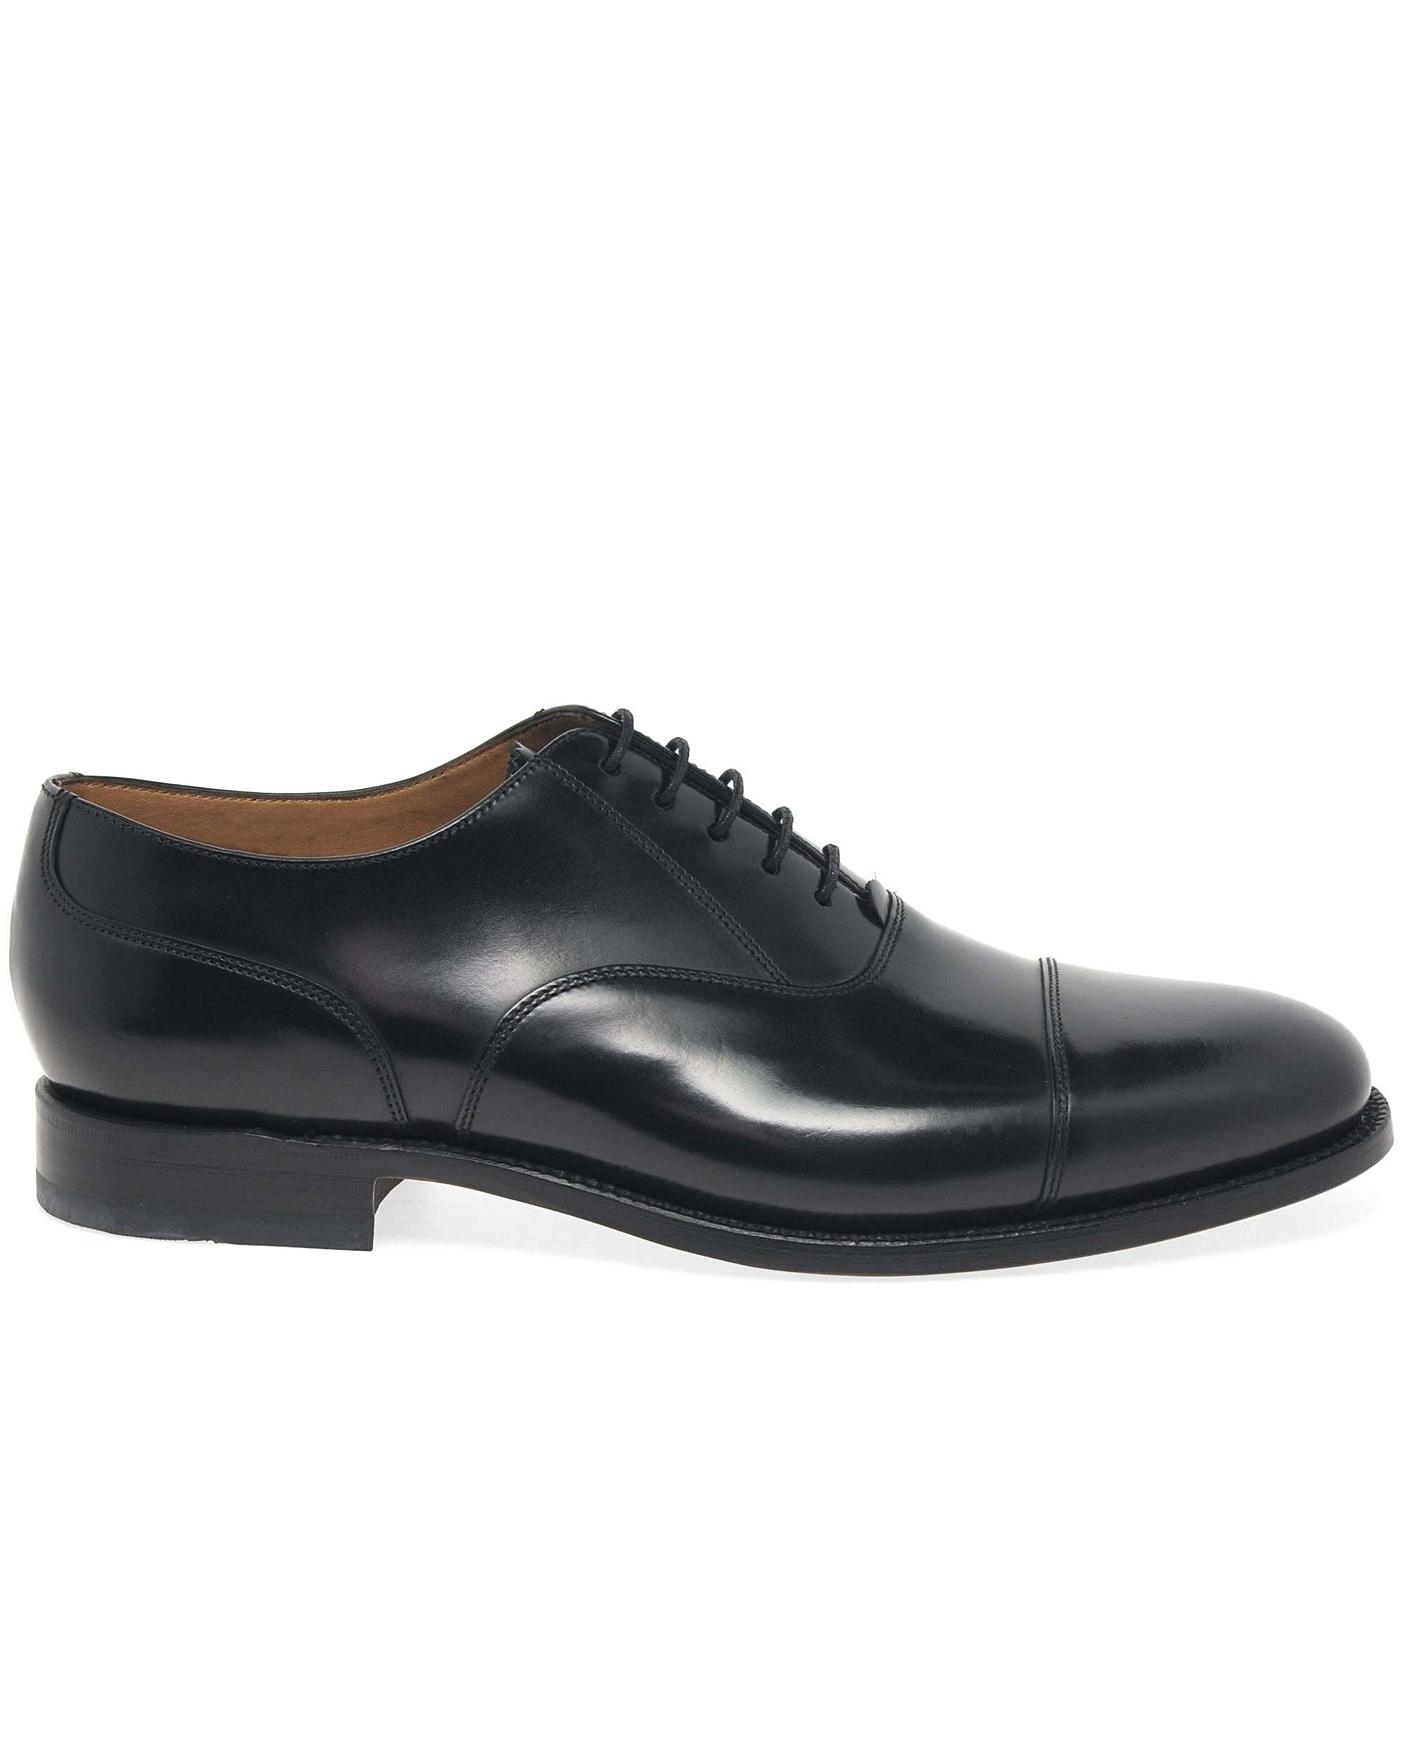 wide oxford shoes